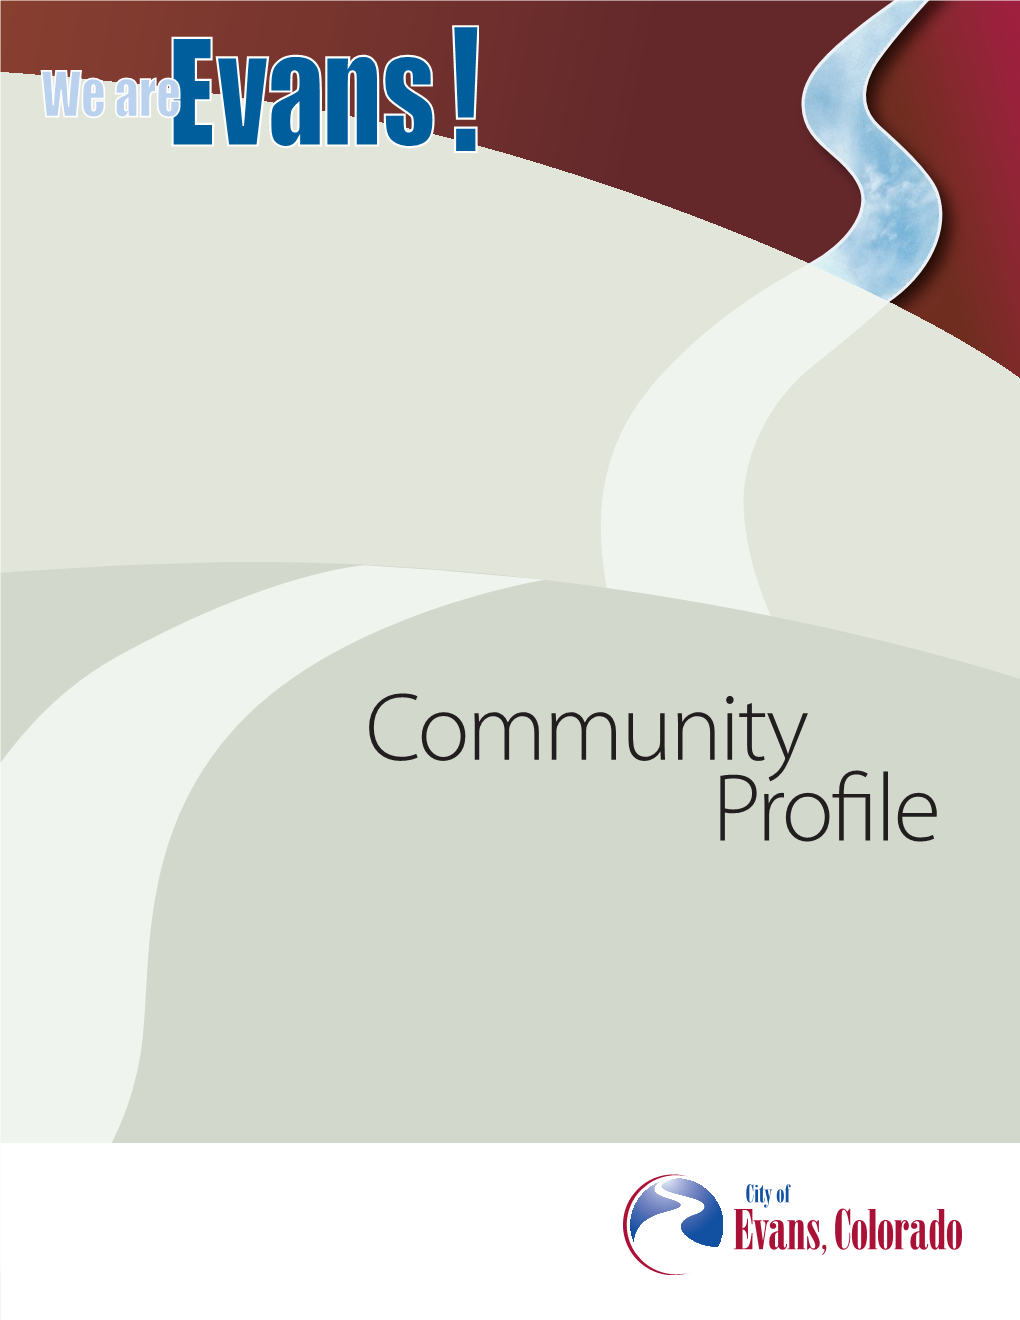 Community Profile the City of Evans Is the Second-Largest City in Weld County, Colorado